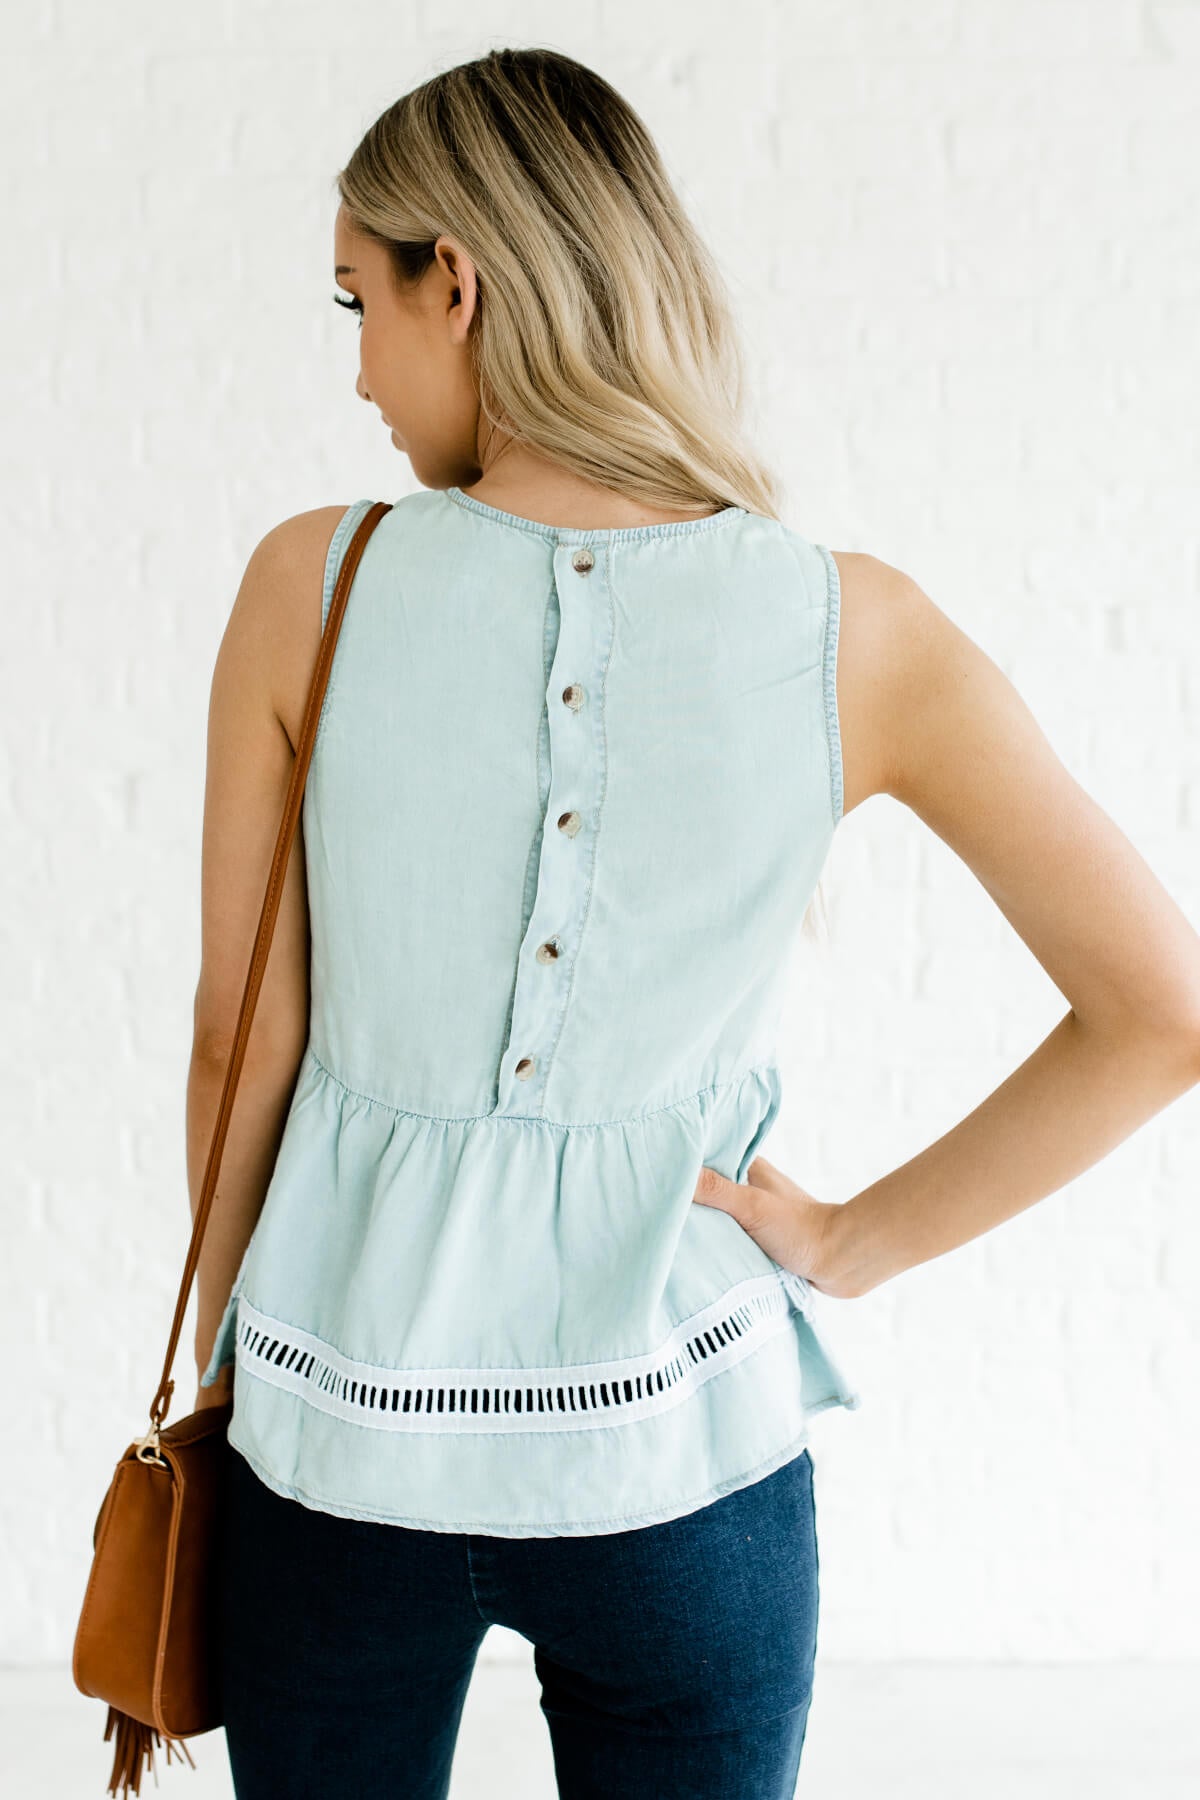 Women's Light Blue Ladder Lace Accented Boutique Tank Top